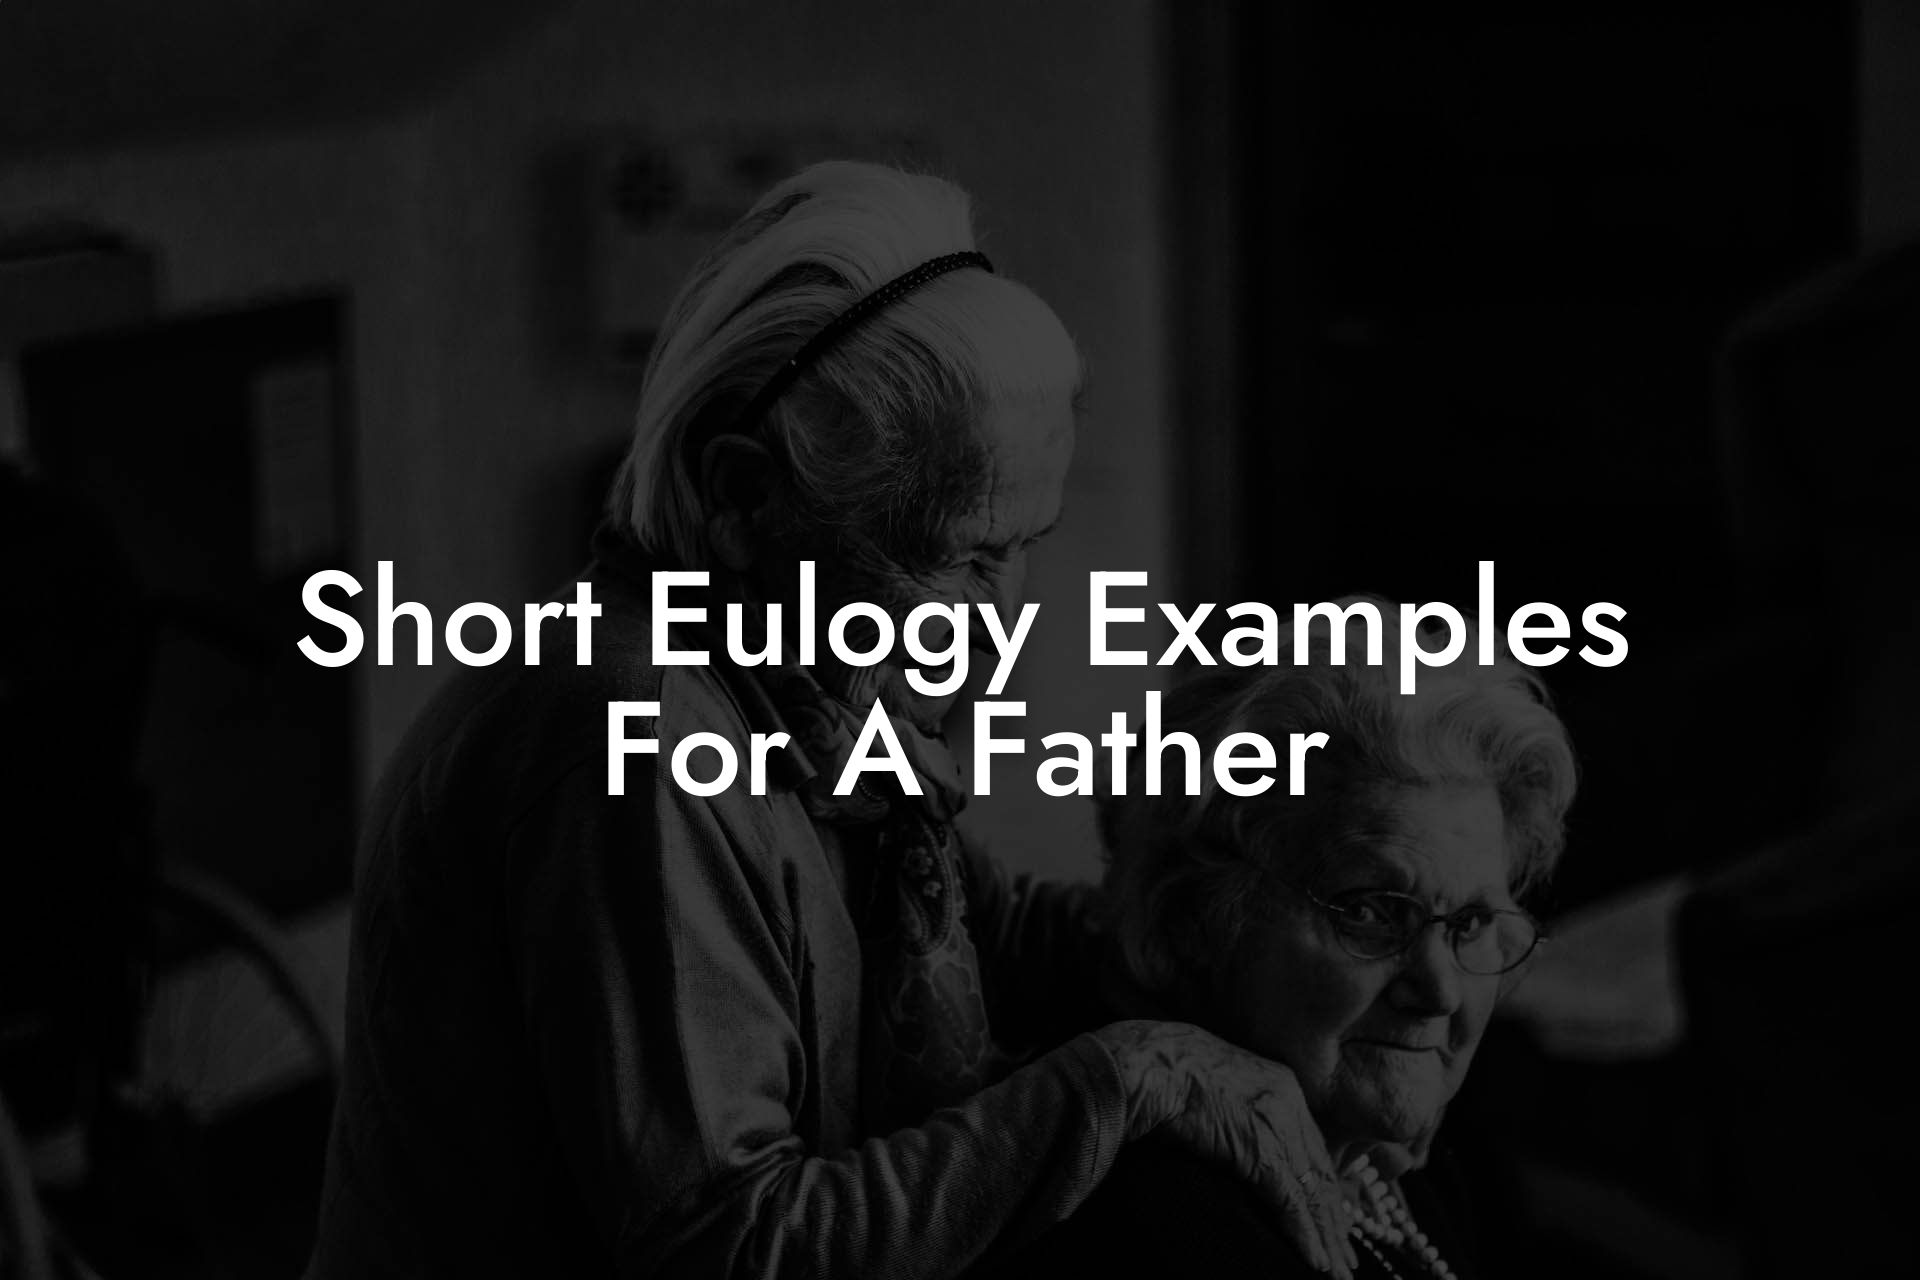 Short Eulogy Examples For A Father